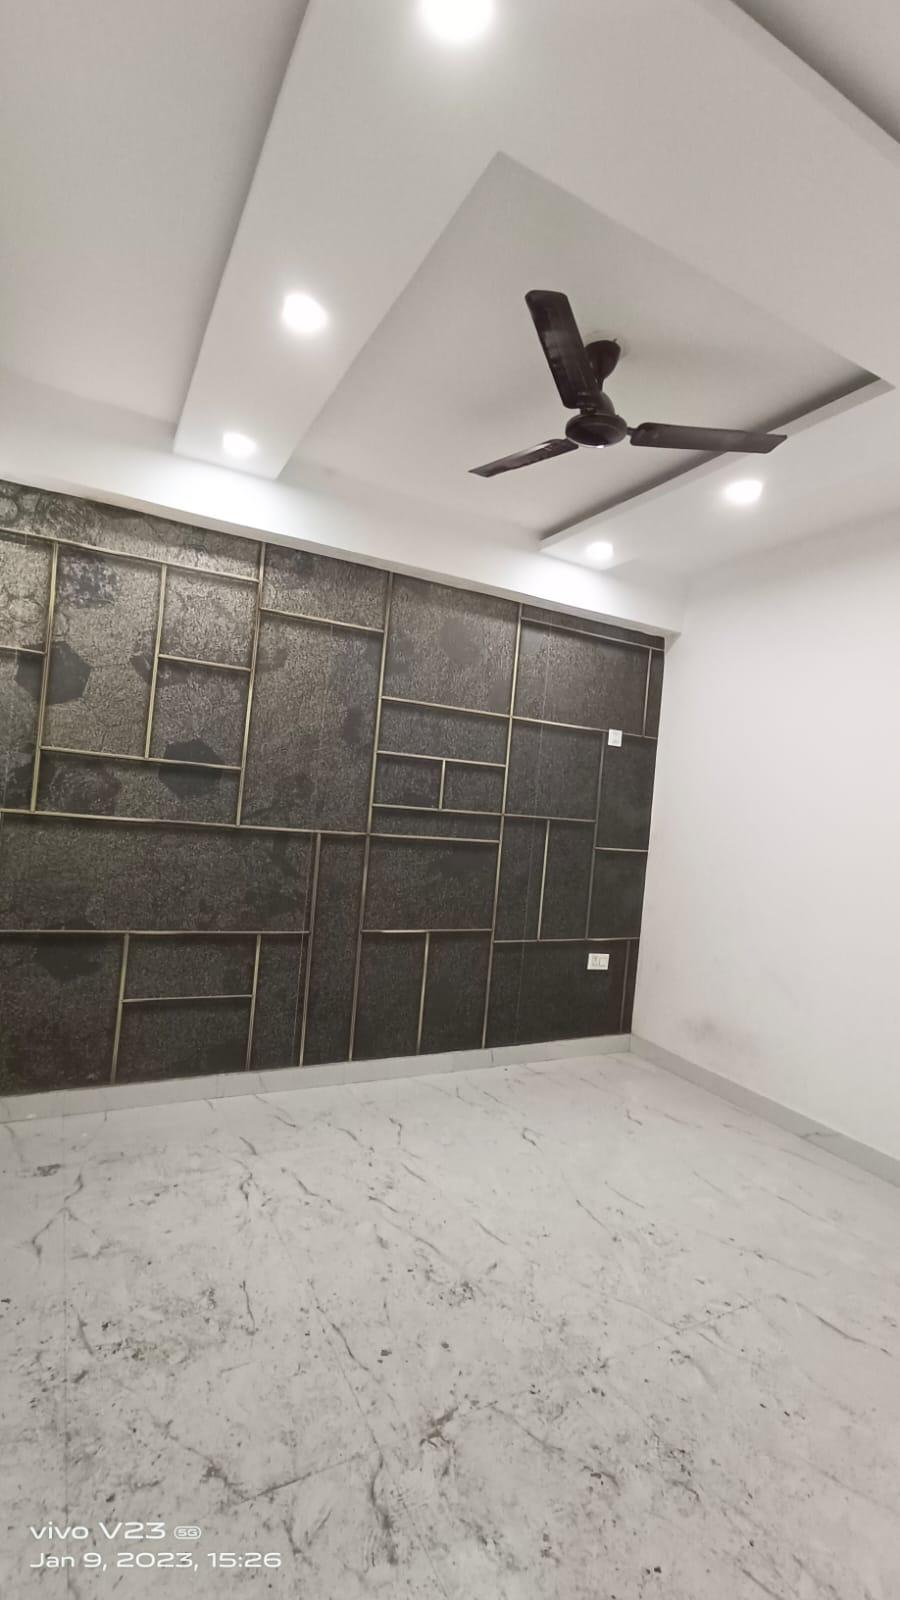 2 Bed/ 2 Bath Sell Apartment/ Flat; 1,050 sq. ft. carpet area for sale @Sector 1, Greater Noida West 